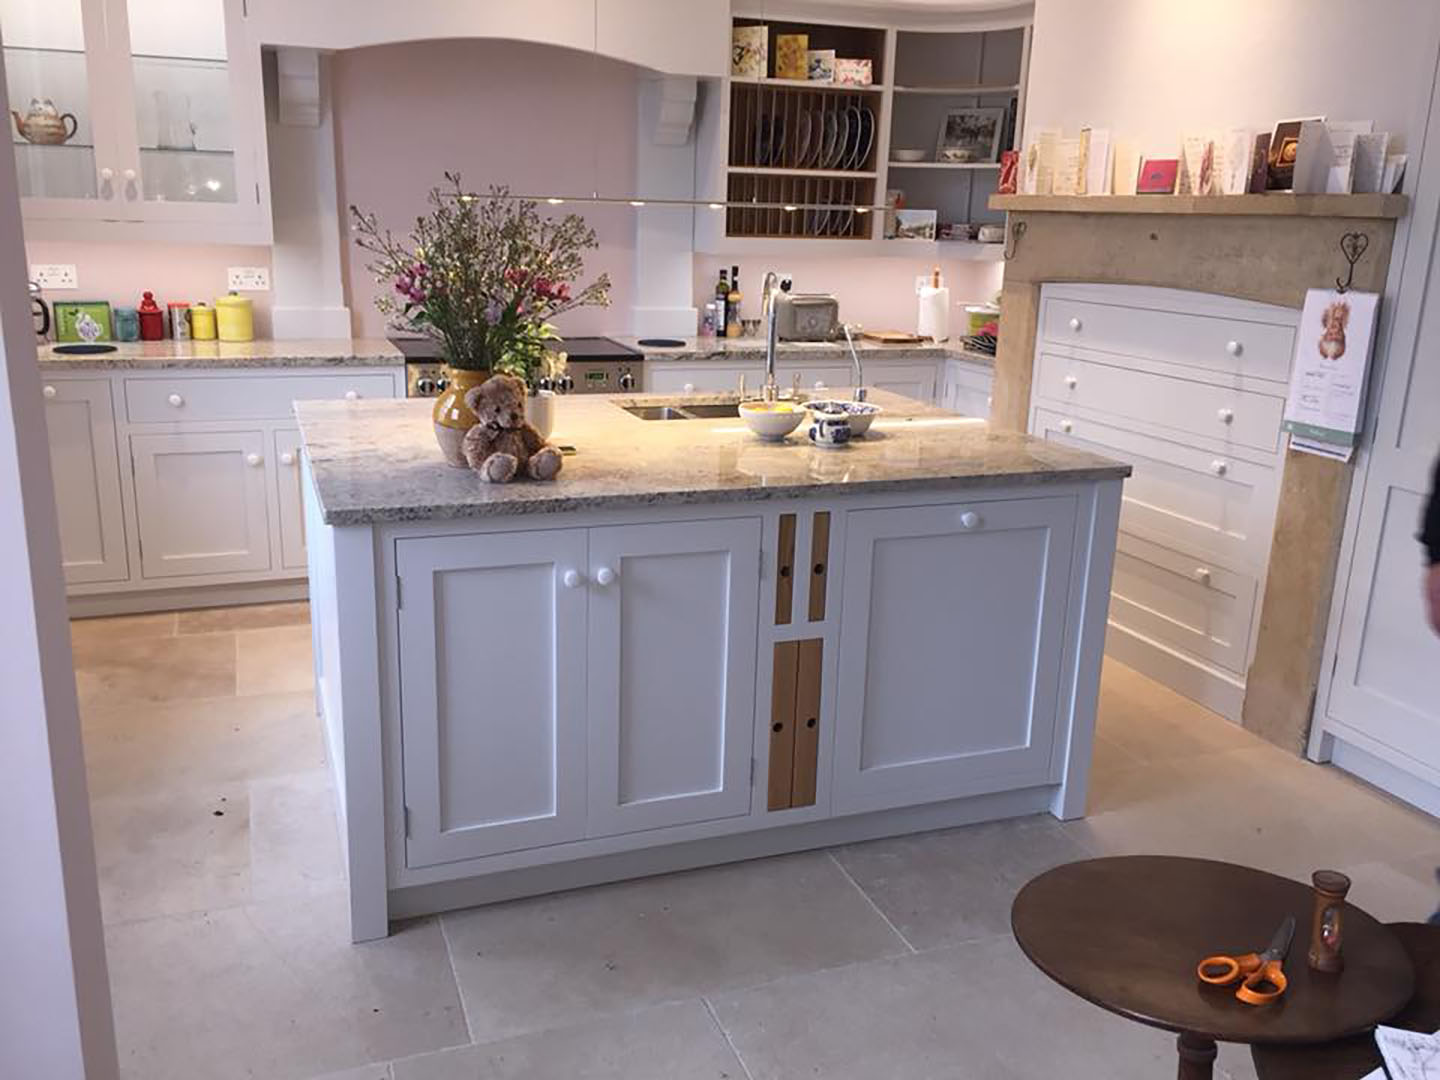 A view of the entire bespoke fitted kitchen.